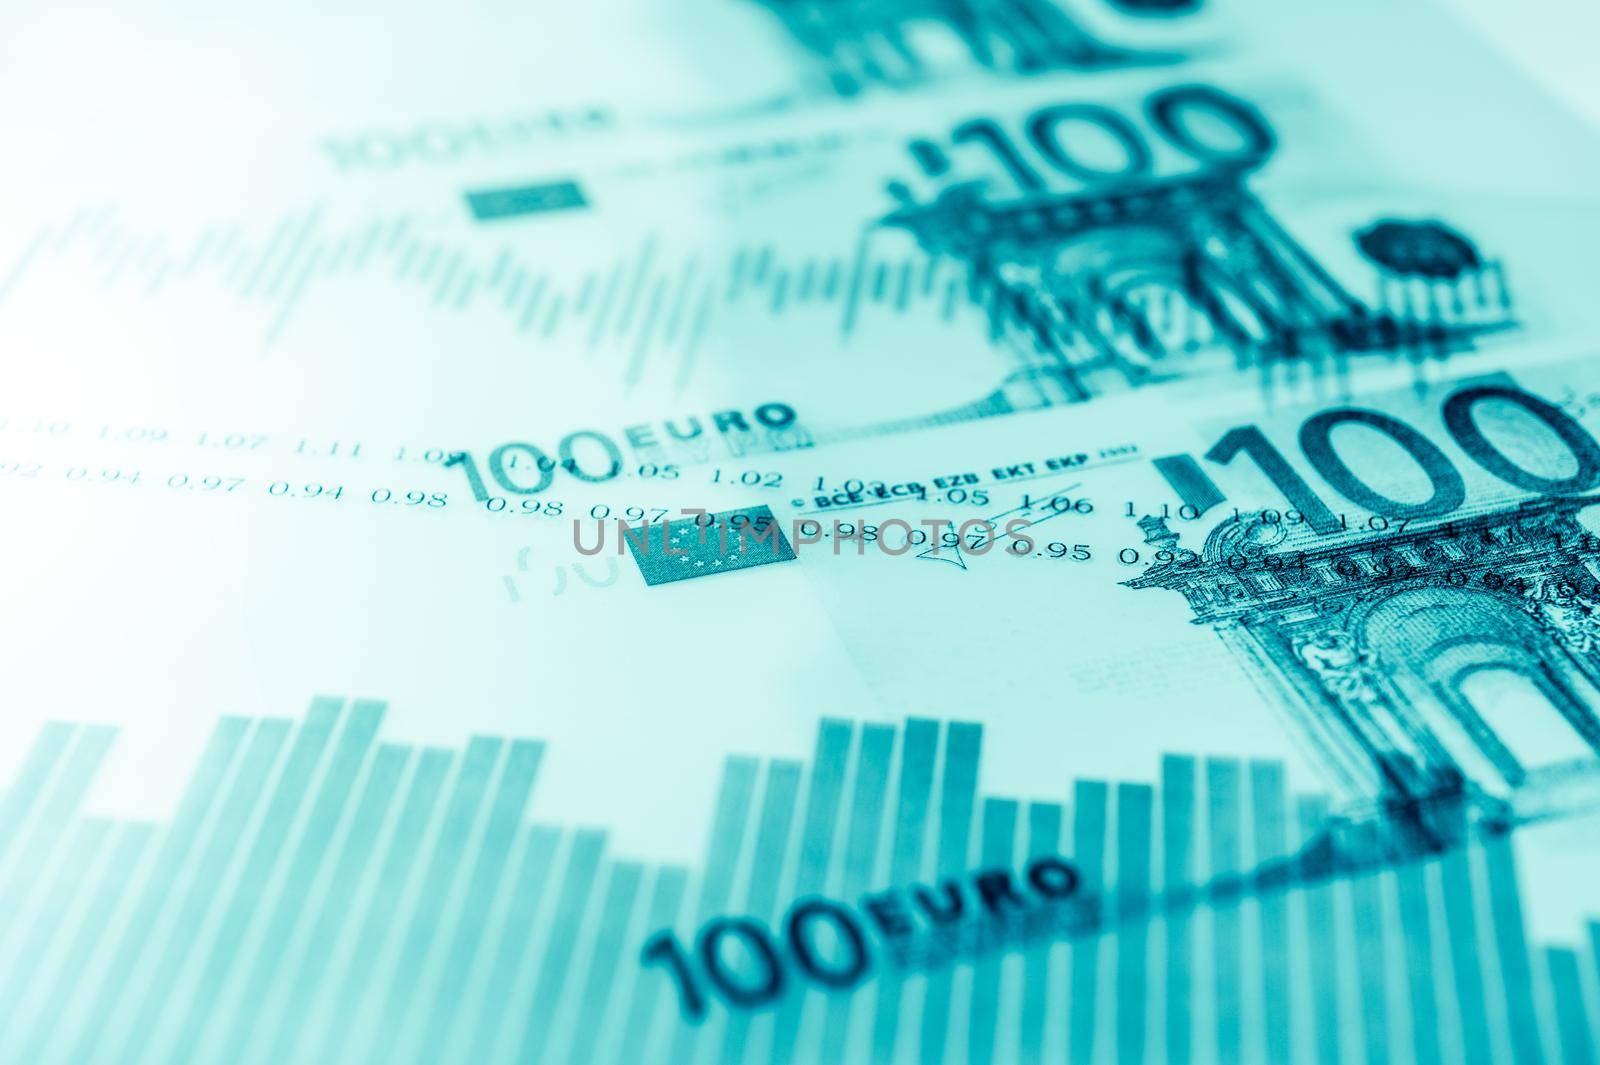 Double exposure Stock market display or forex trading graph and candlestick chart on Euro banknote. Economy trends background for business idea and all art work design. Abstract finance background.